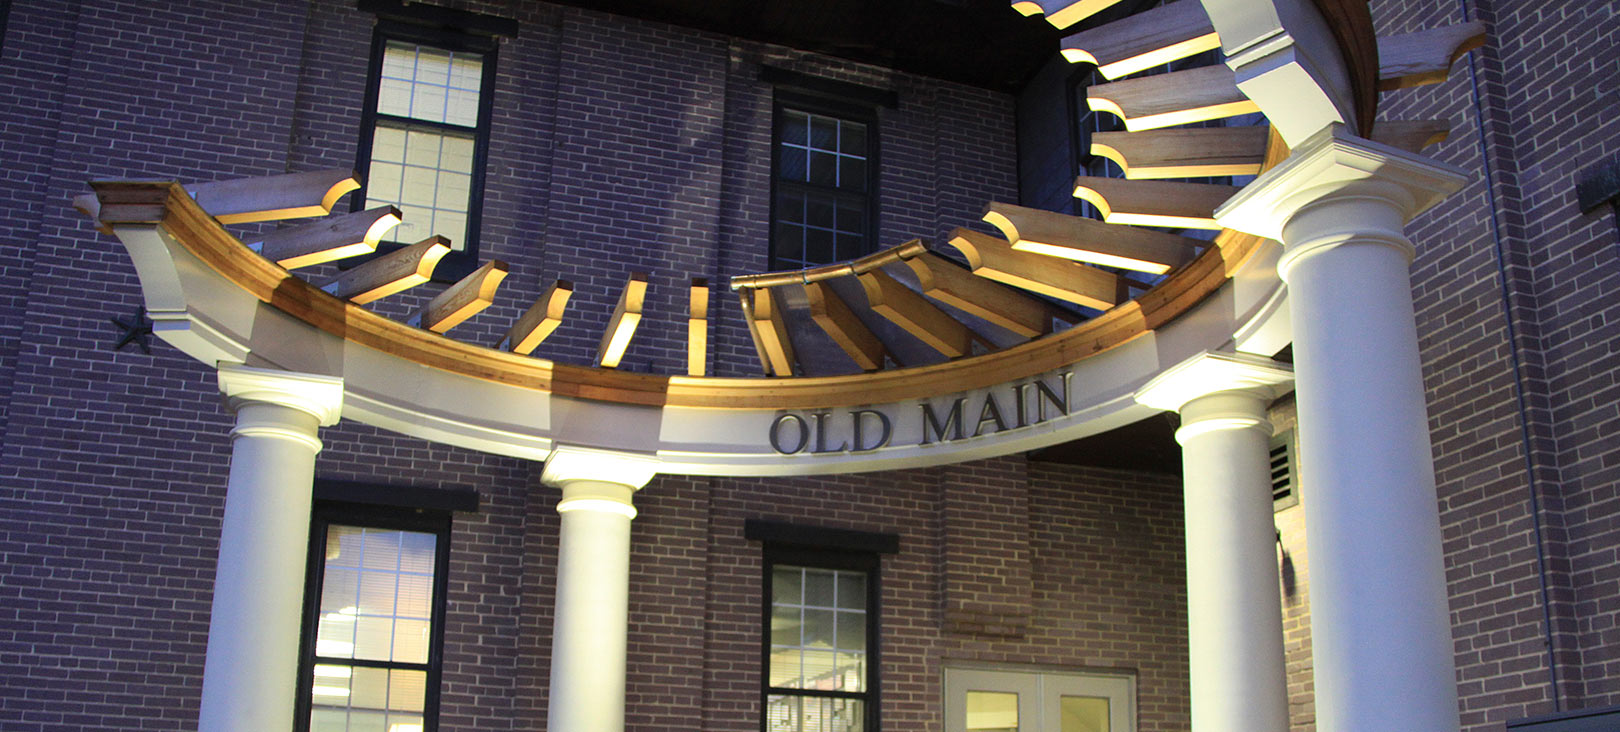 Finance & Planning  The entrance of Old Main Office Building which is lit up at night.jpg